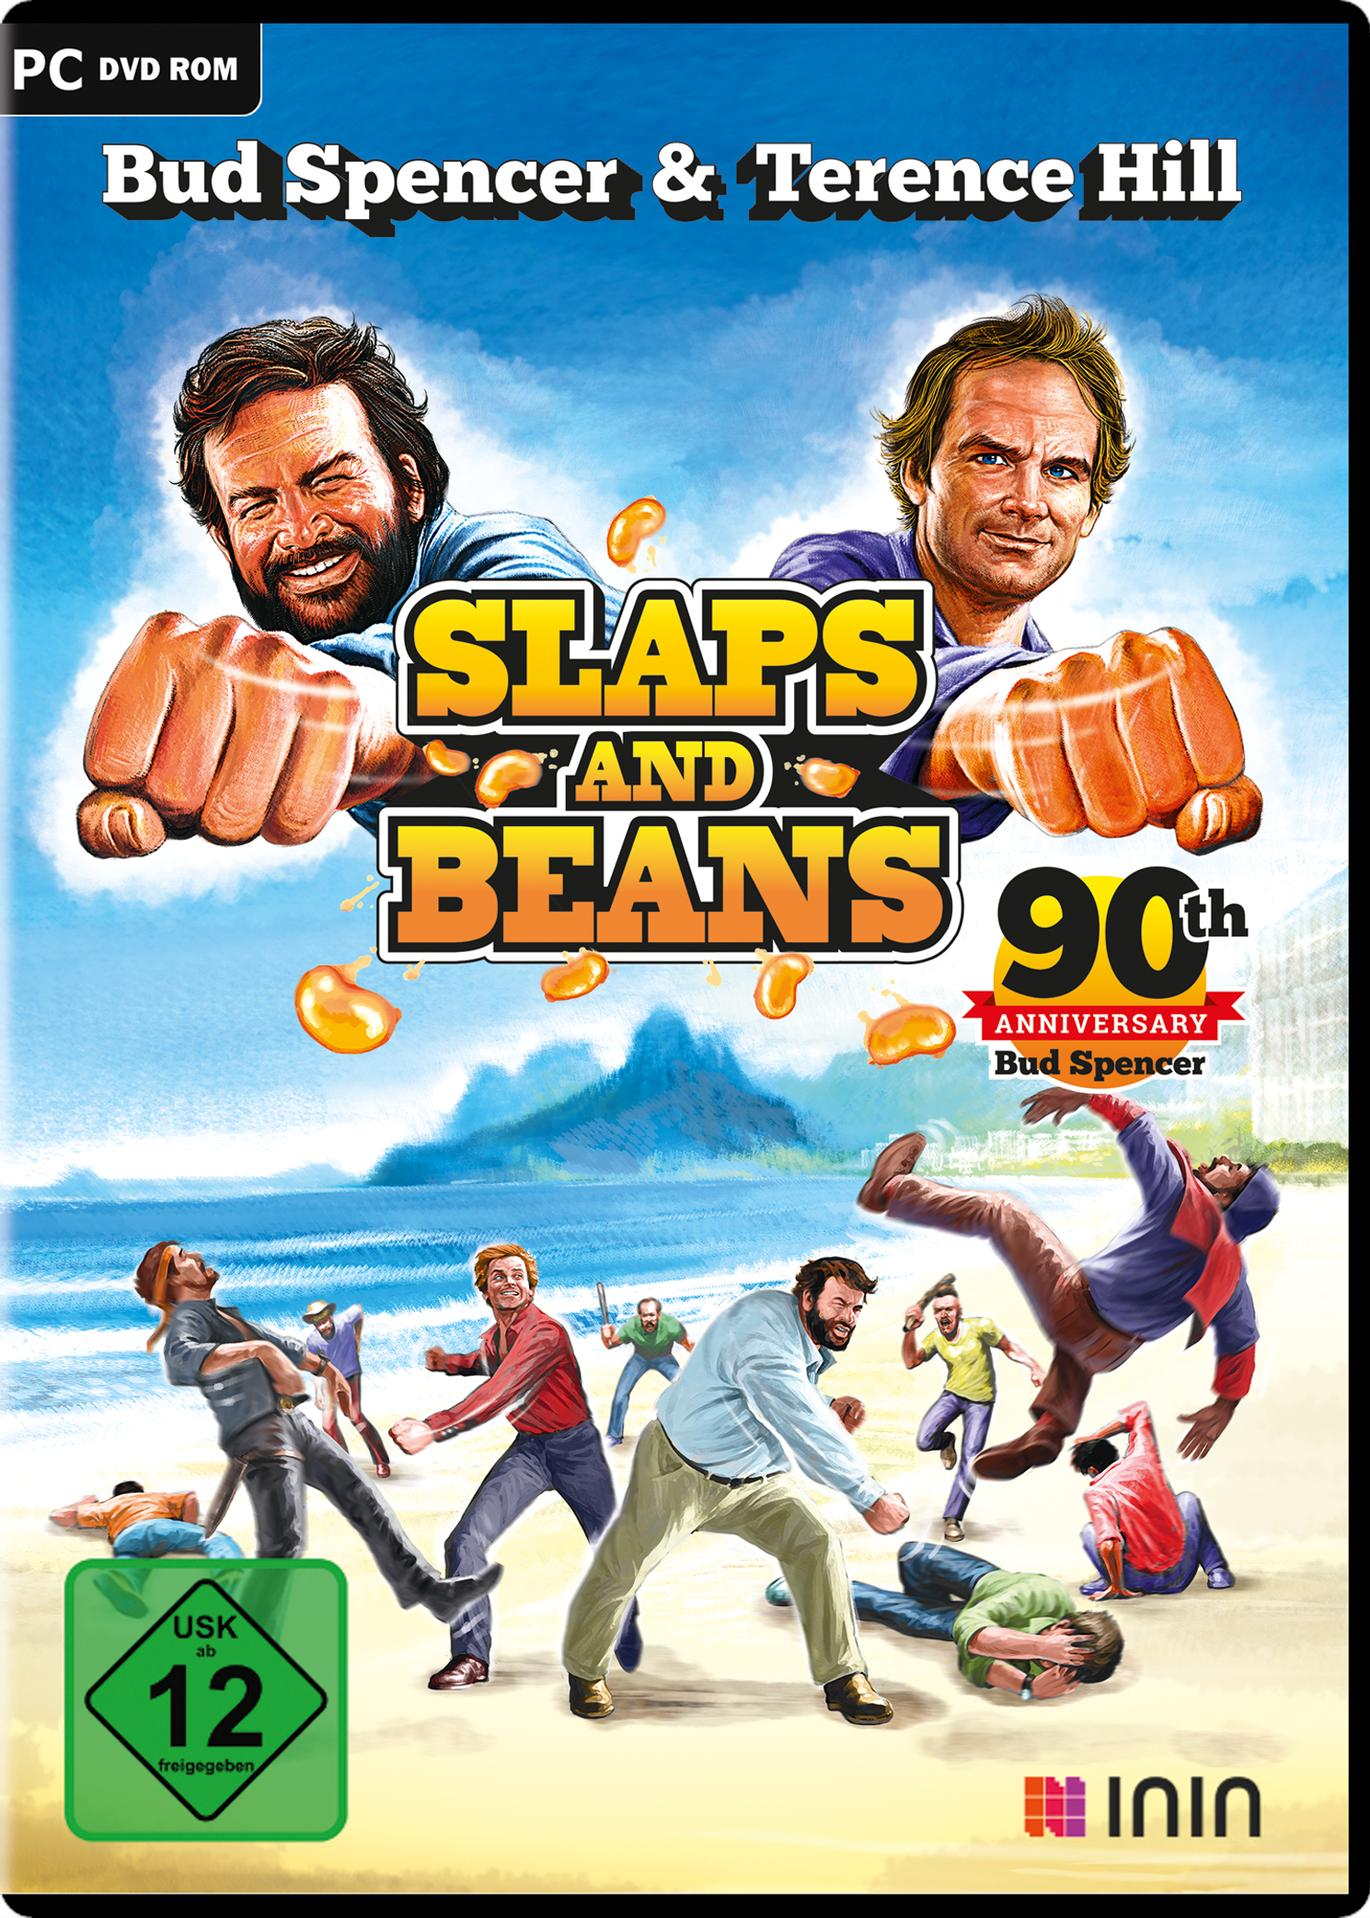 Bud Spencer & Terence [PC] – Anniversary Edition Hill Beans Slaps And – 